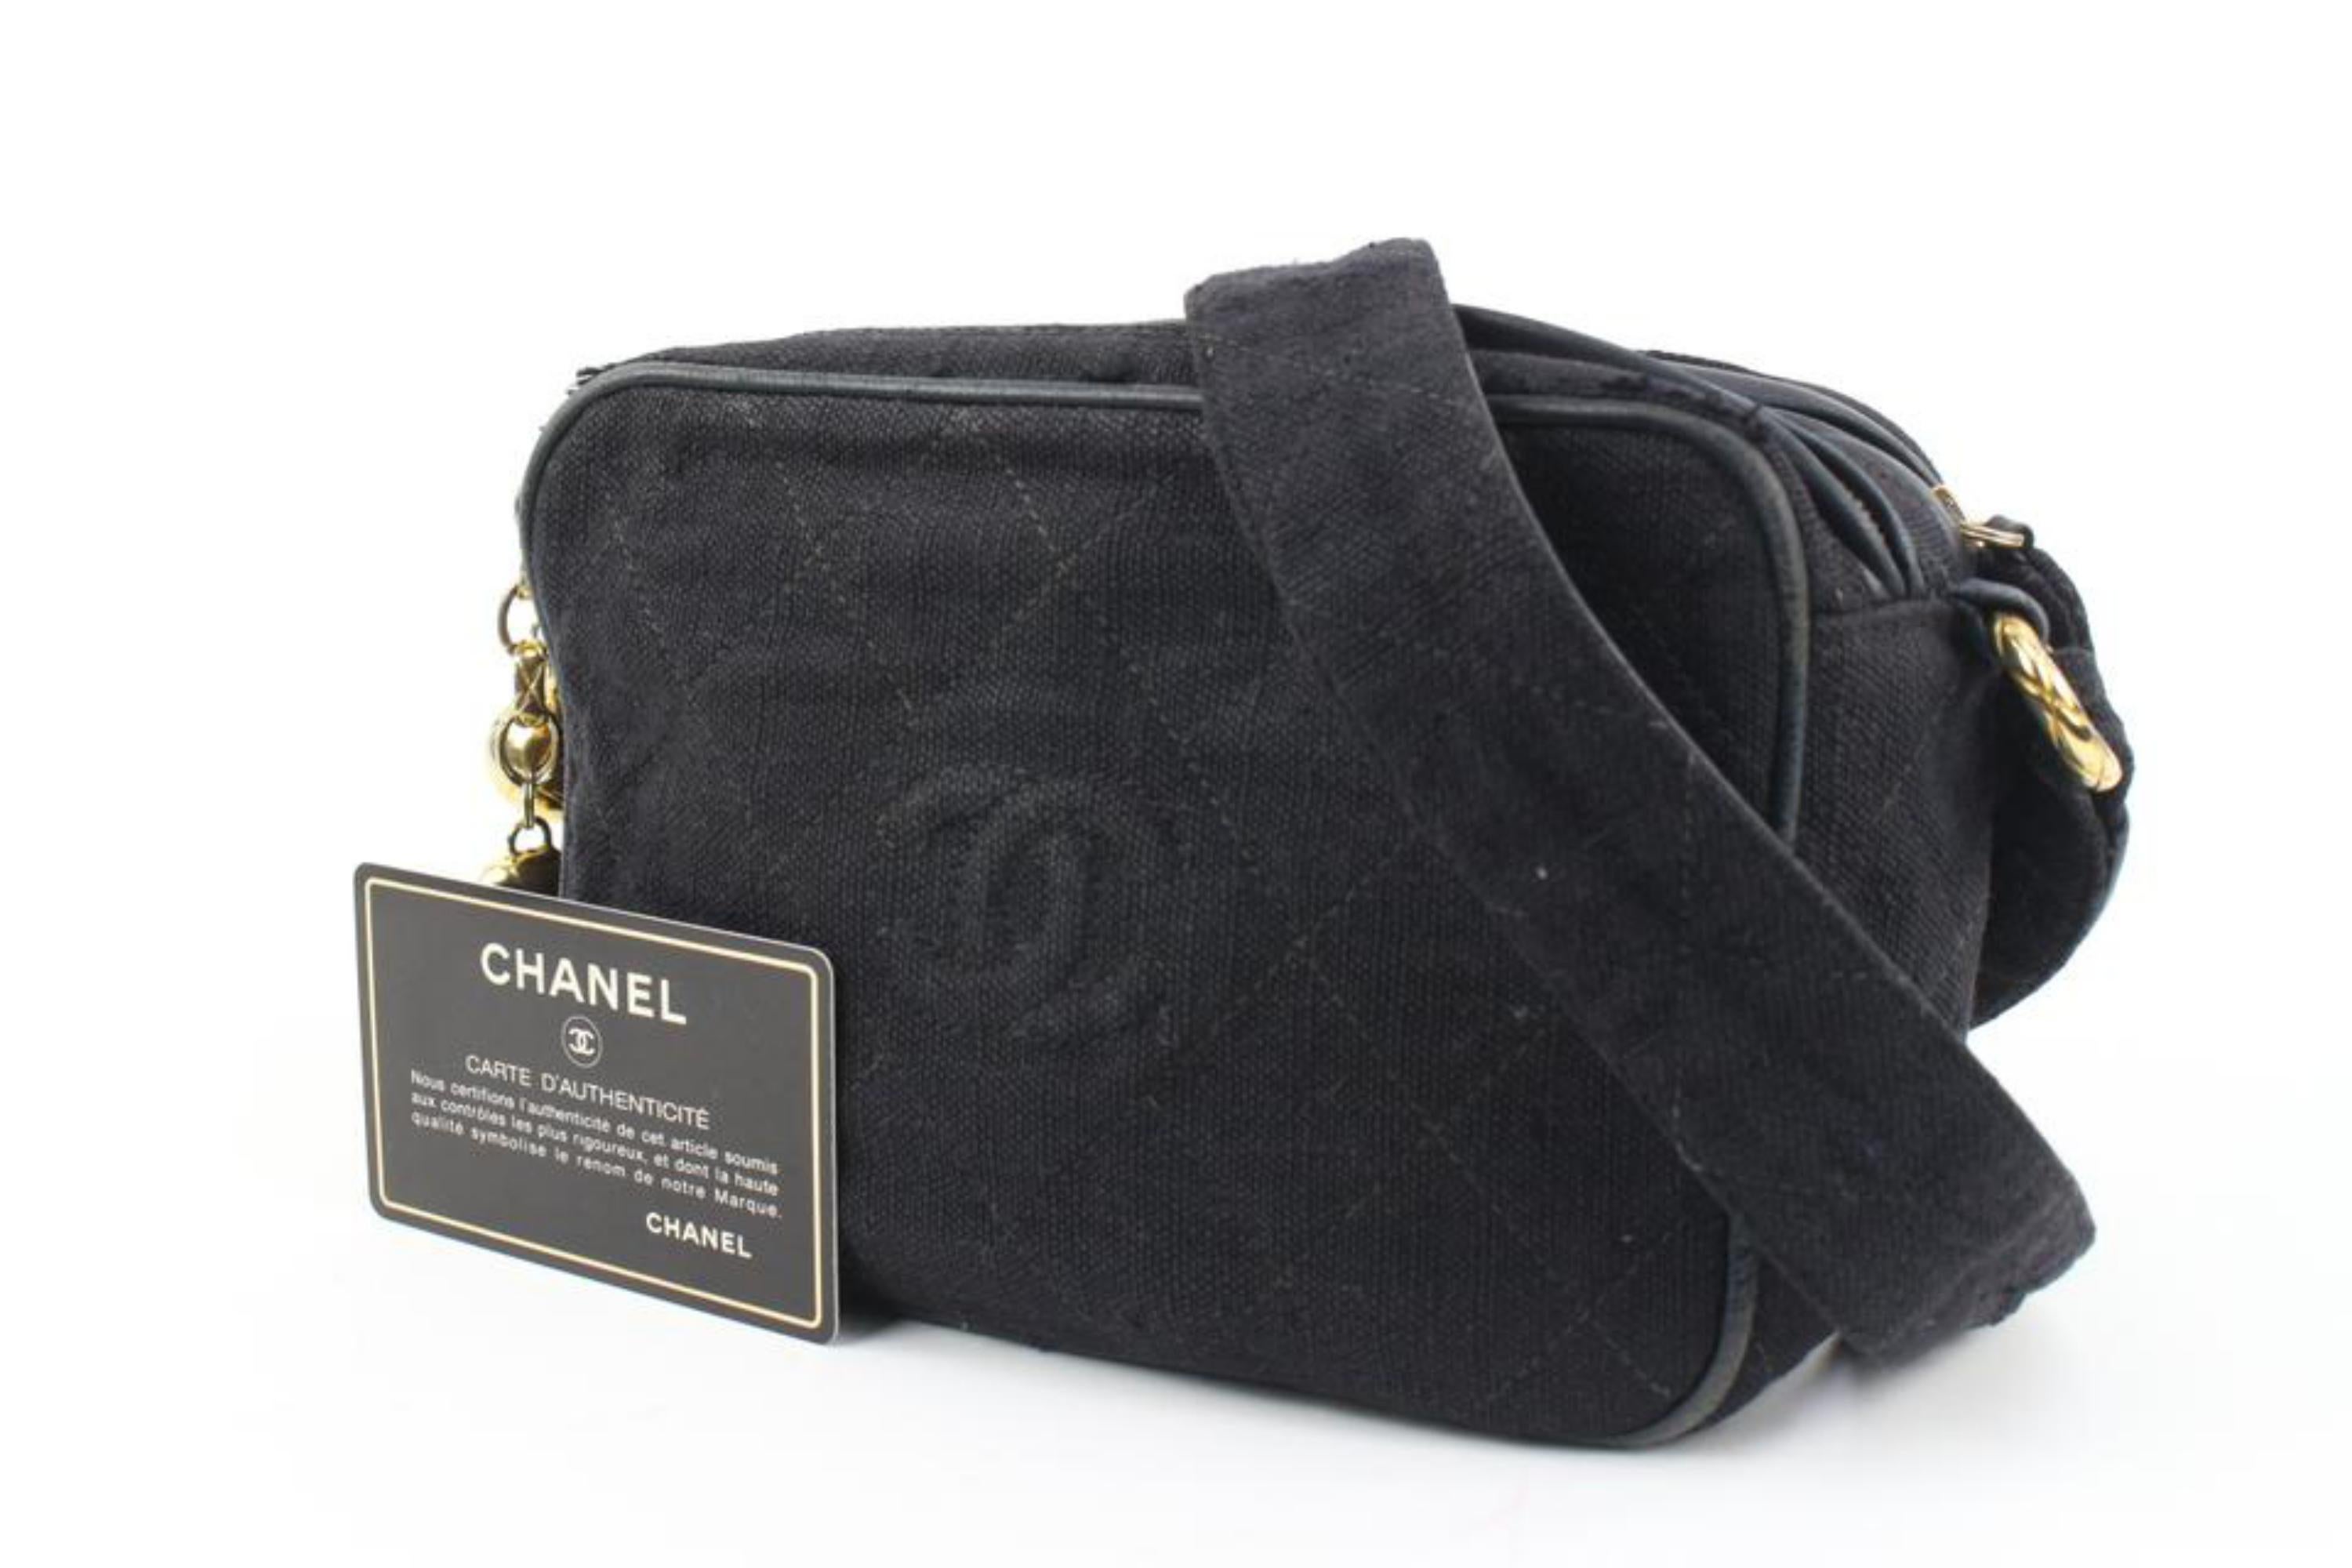 Chanel Ultra Rare Black Woven Gold Charm Camera Bag 57ck32s
Date Code/Serial Number: 2661008
Made In: Italy
Measurements: Length:  7